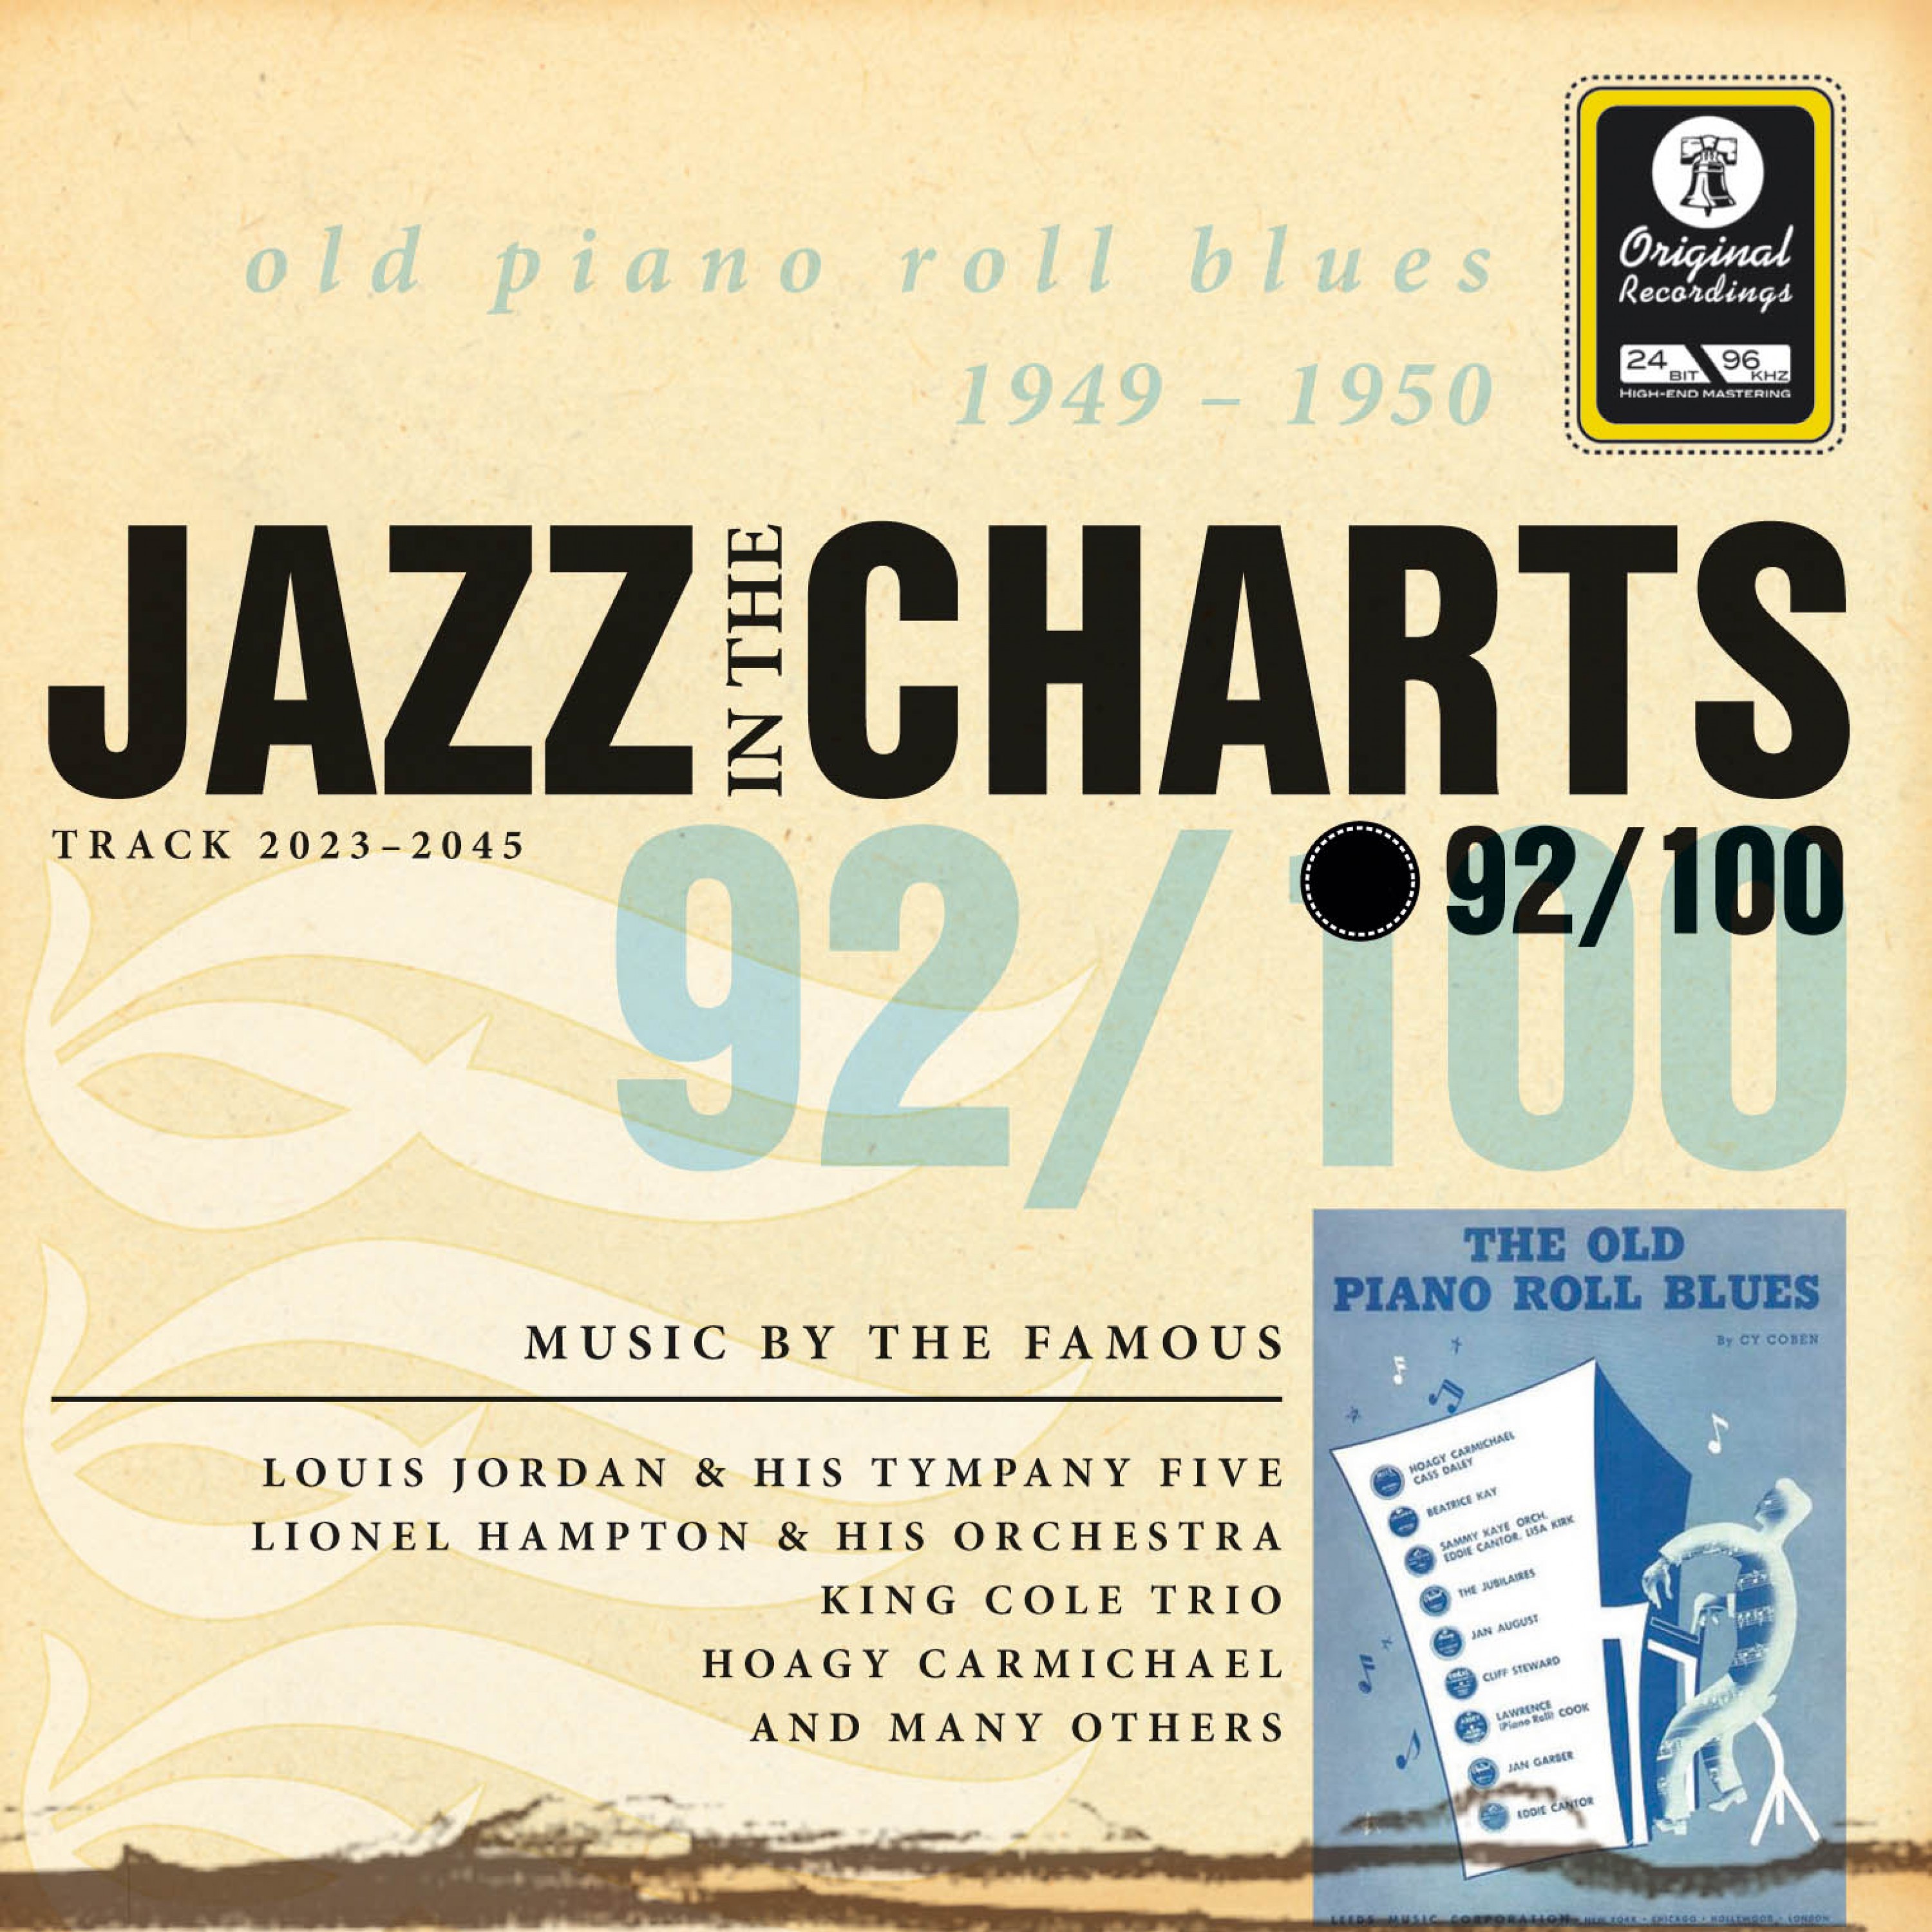 Jazz in the Charts Vol. 92 - Old Piano Roll Blues